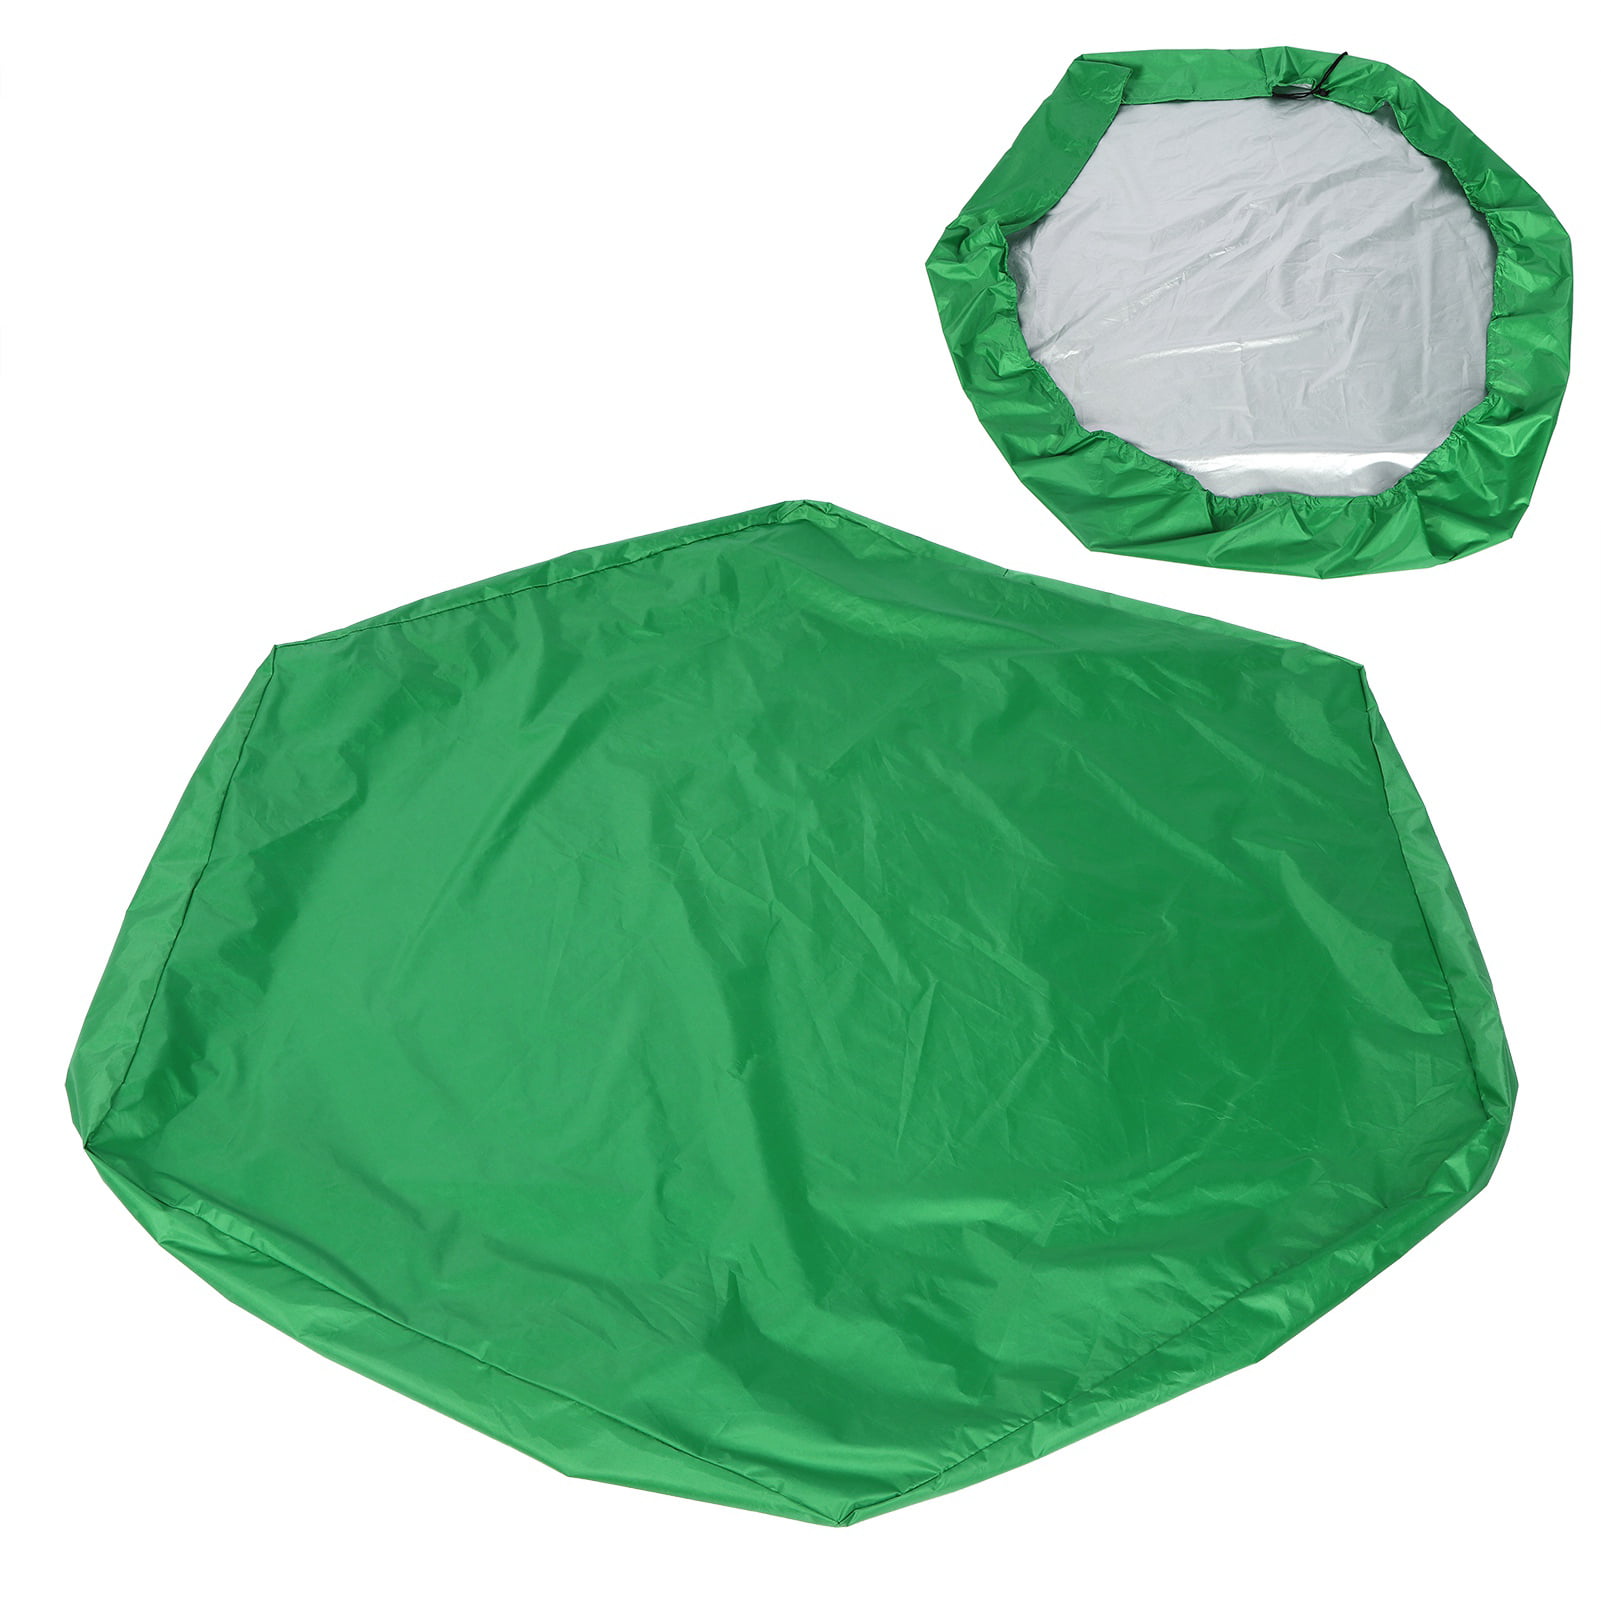 T-PRO sand pit covers in 4 sizes - air and water-permeable